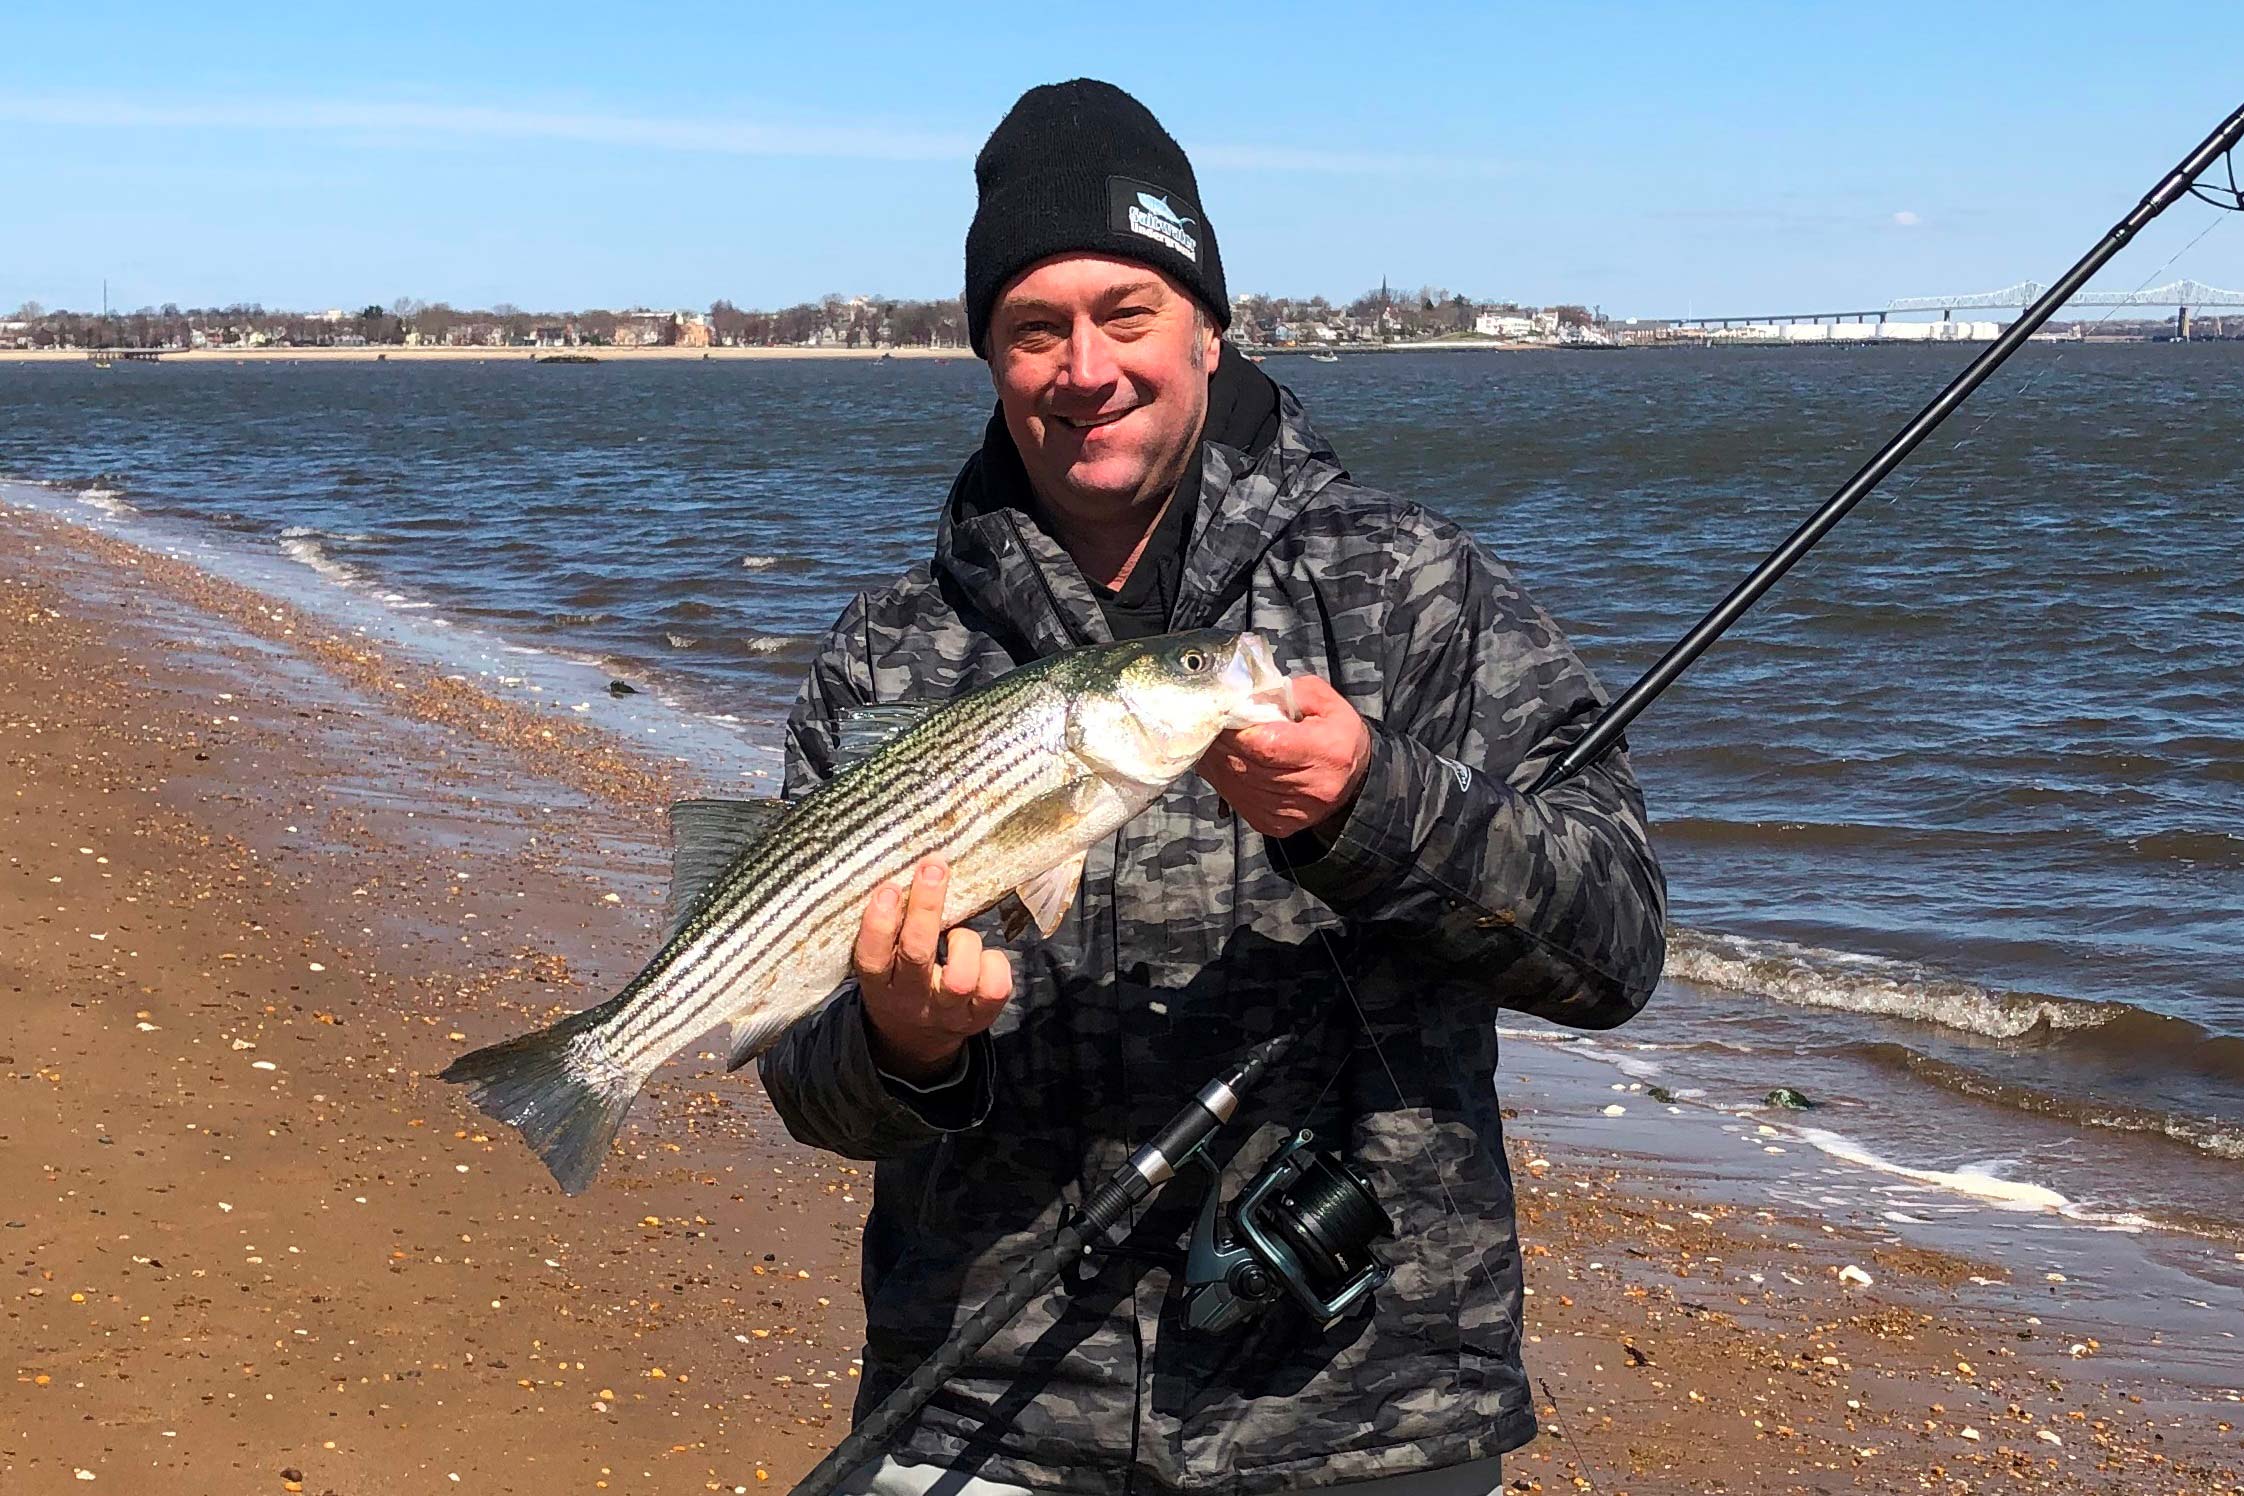 https://www.thefisherman.com/wp-content/uploads/2022/02/20220303-wormng-bayshore-stripers-THE-AUTHOR.jpg